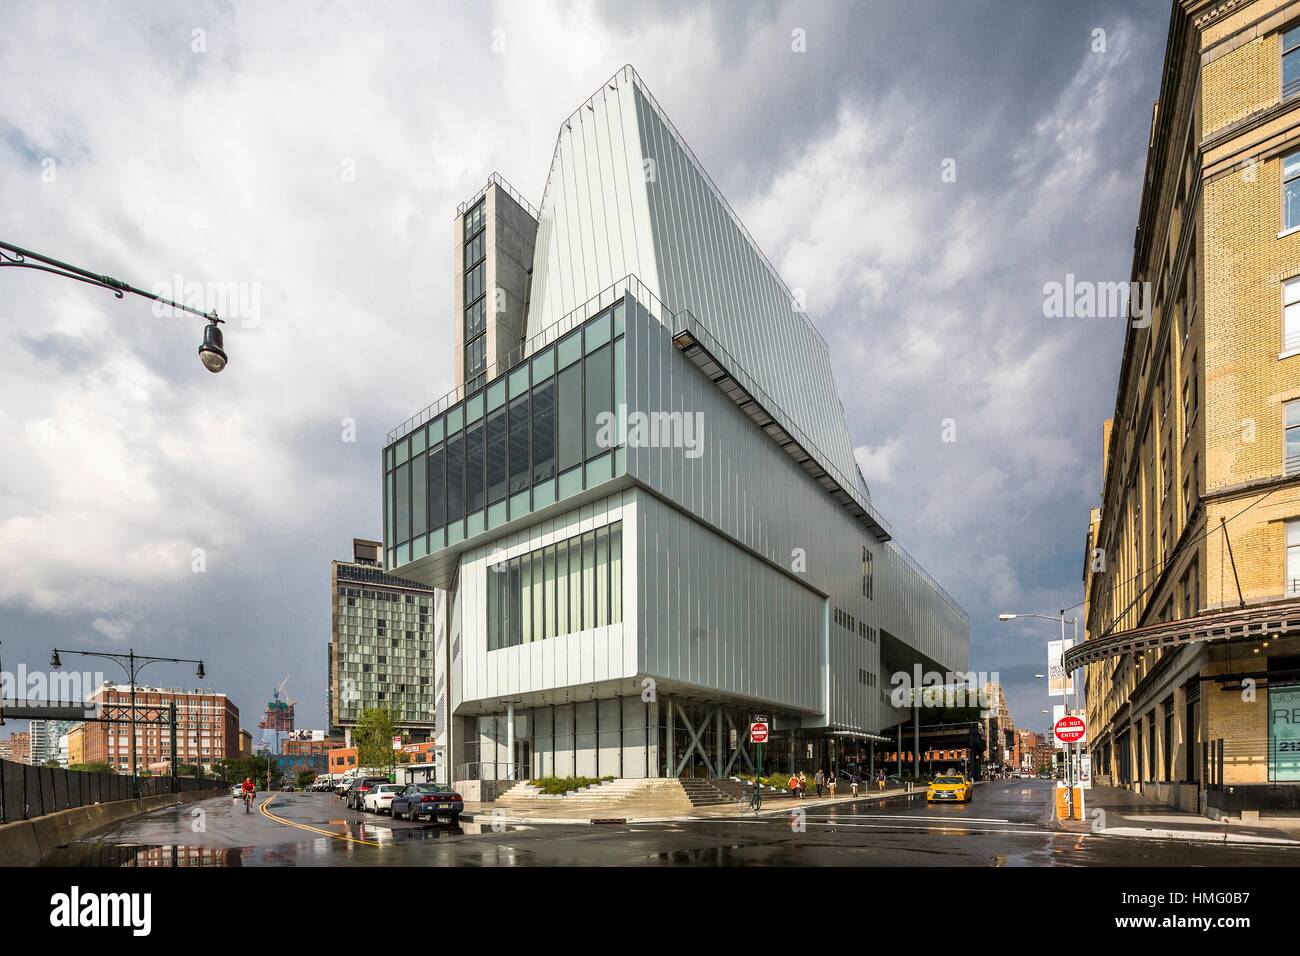 Meatpacking District, Whitney Museum of American Art (architect Renzo Piano)  on the background, Manhattan, New York City, New York, USA Stock Photo -  Alamy